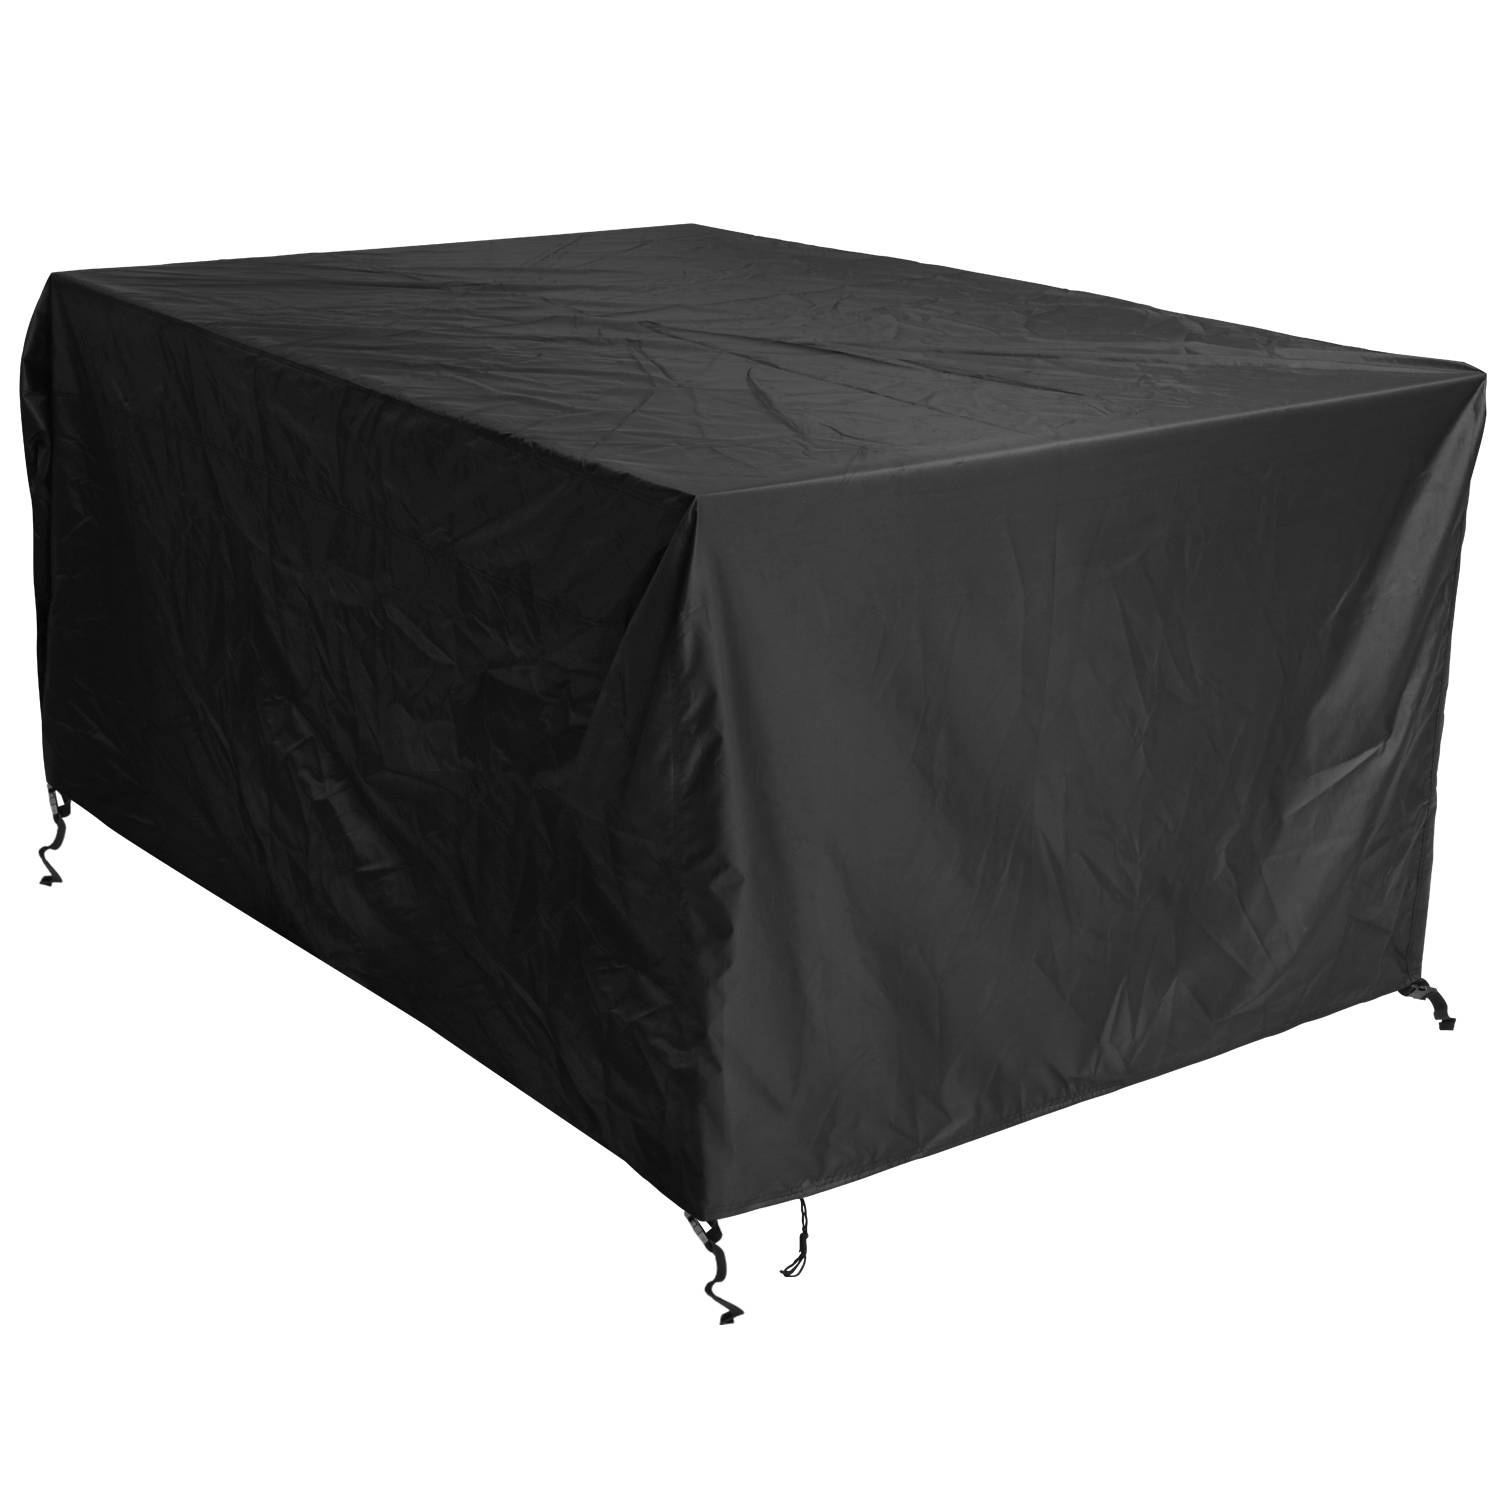 242x162x100cm-420D-Patio-Garden-Outdoor-Furniture-Set-Protector-Cover-Table-Chair-Waterproof-Cover-1665448-7